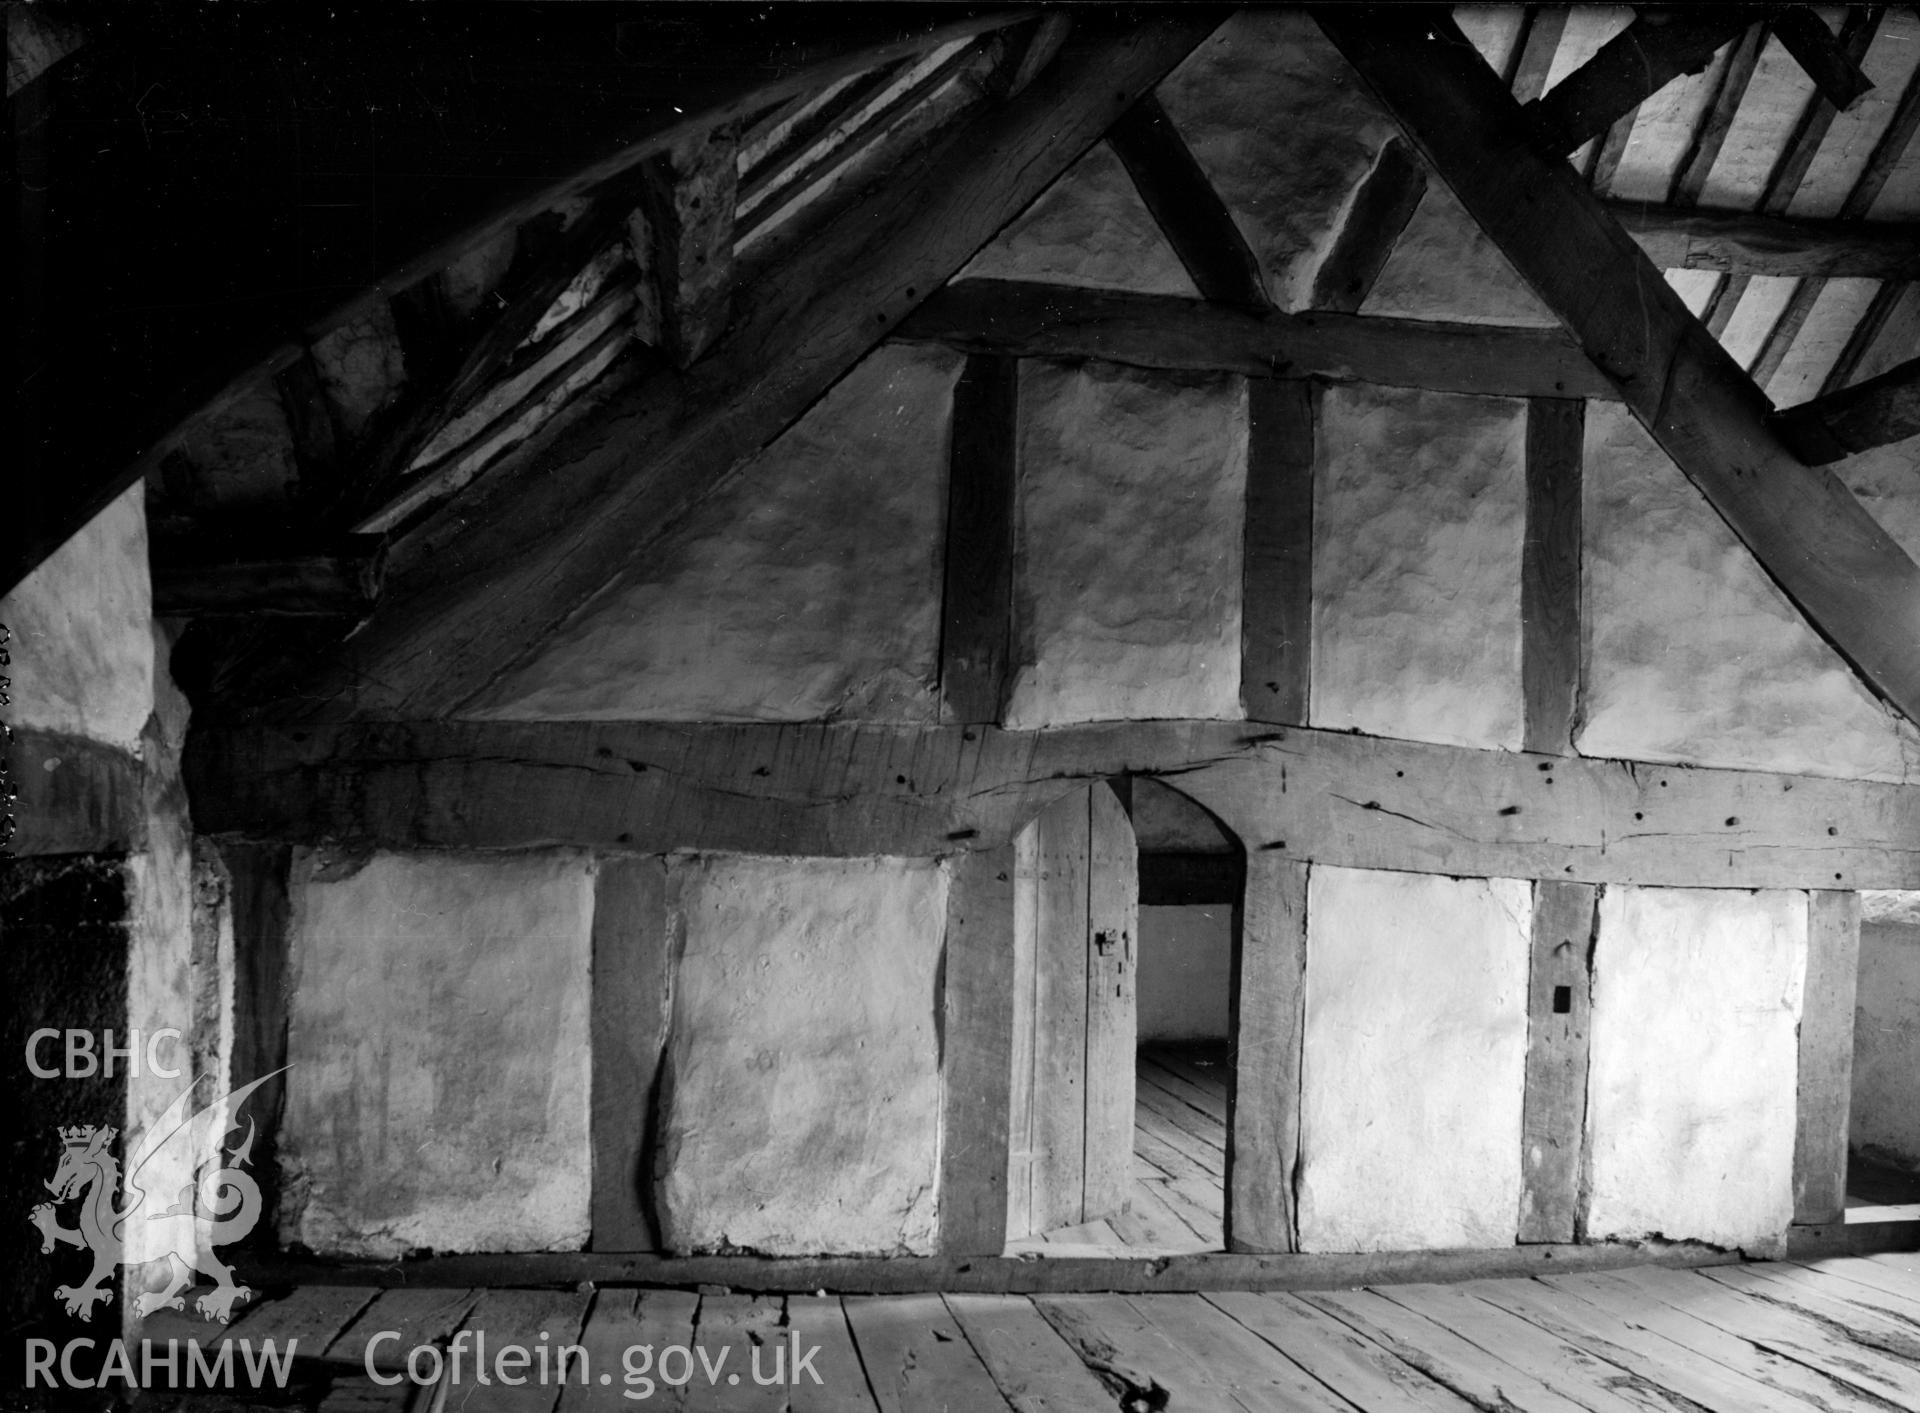 A view of timber beamed roof and a timber framed wall..